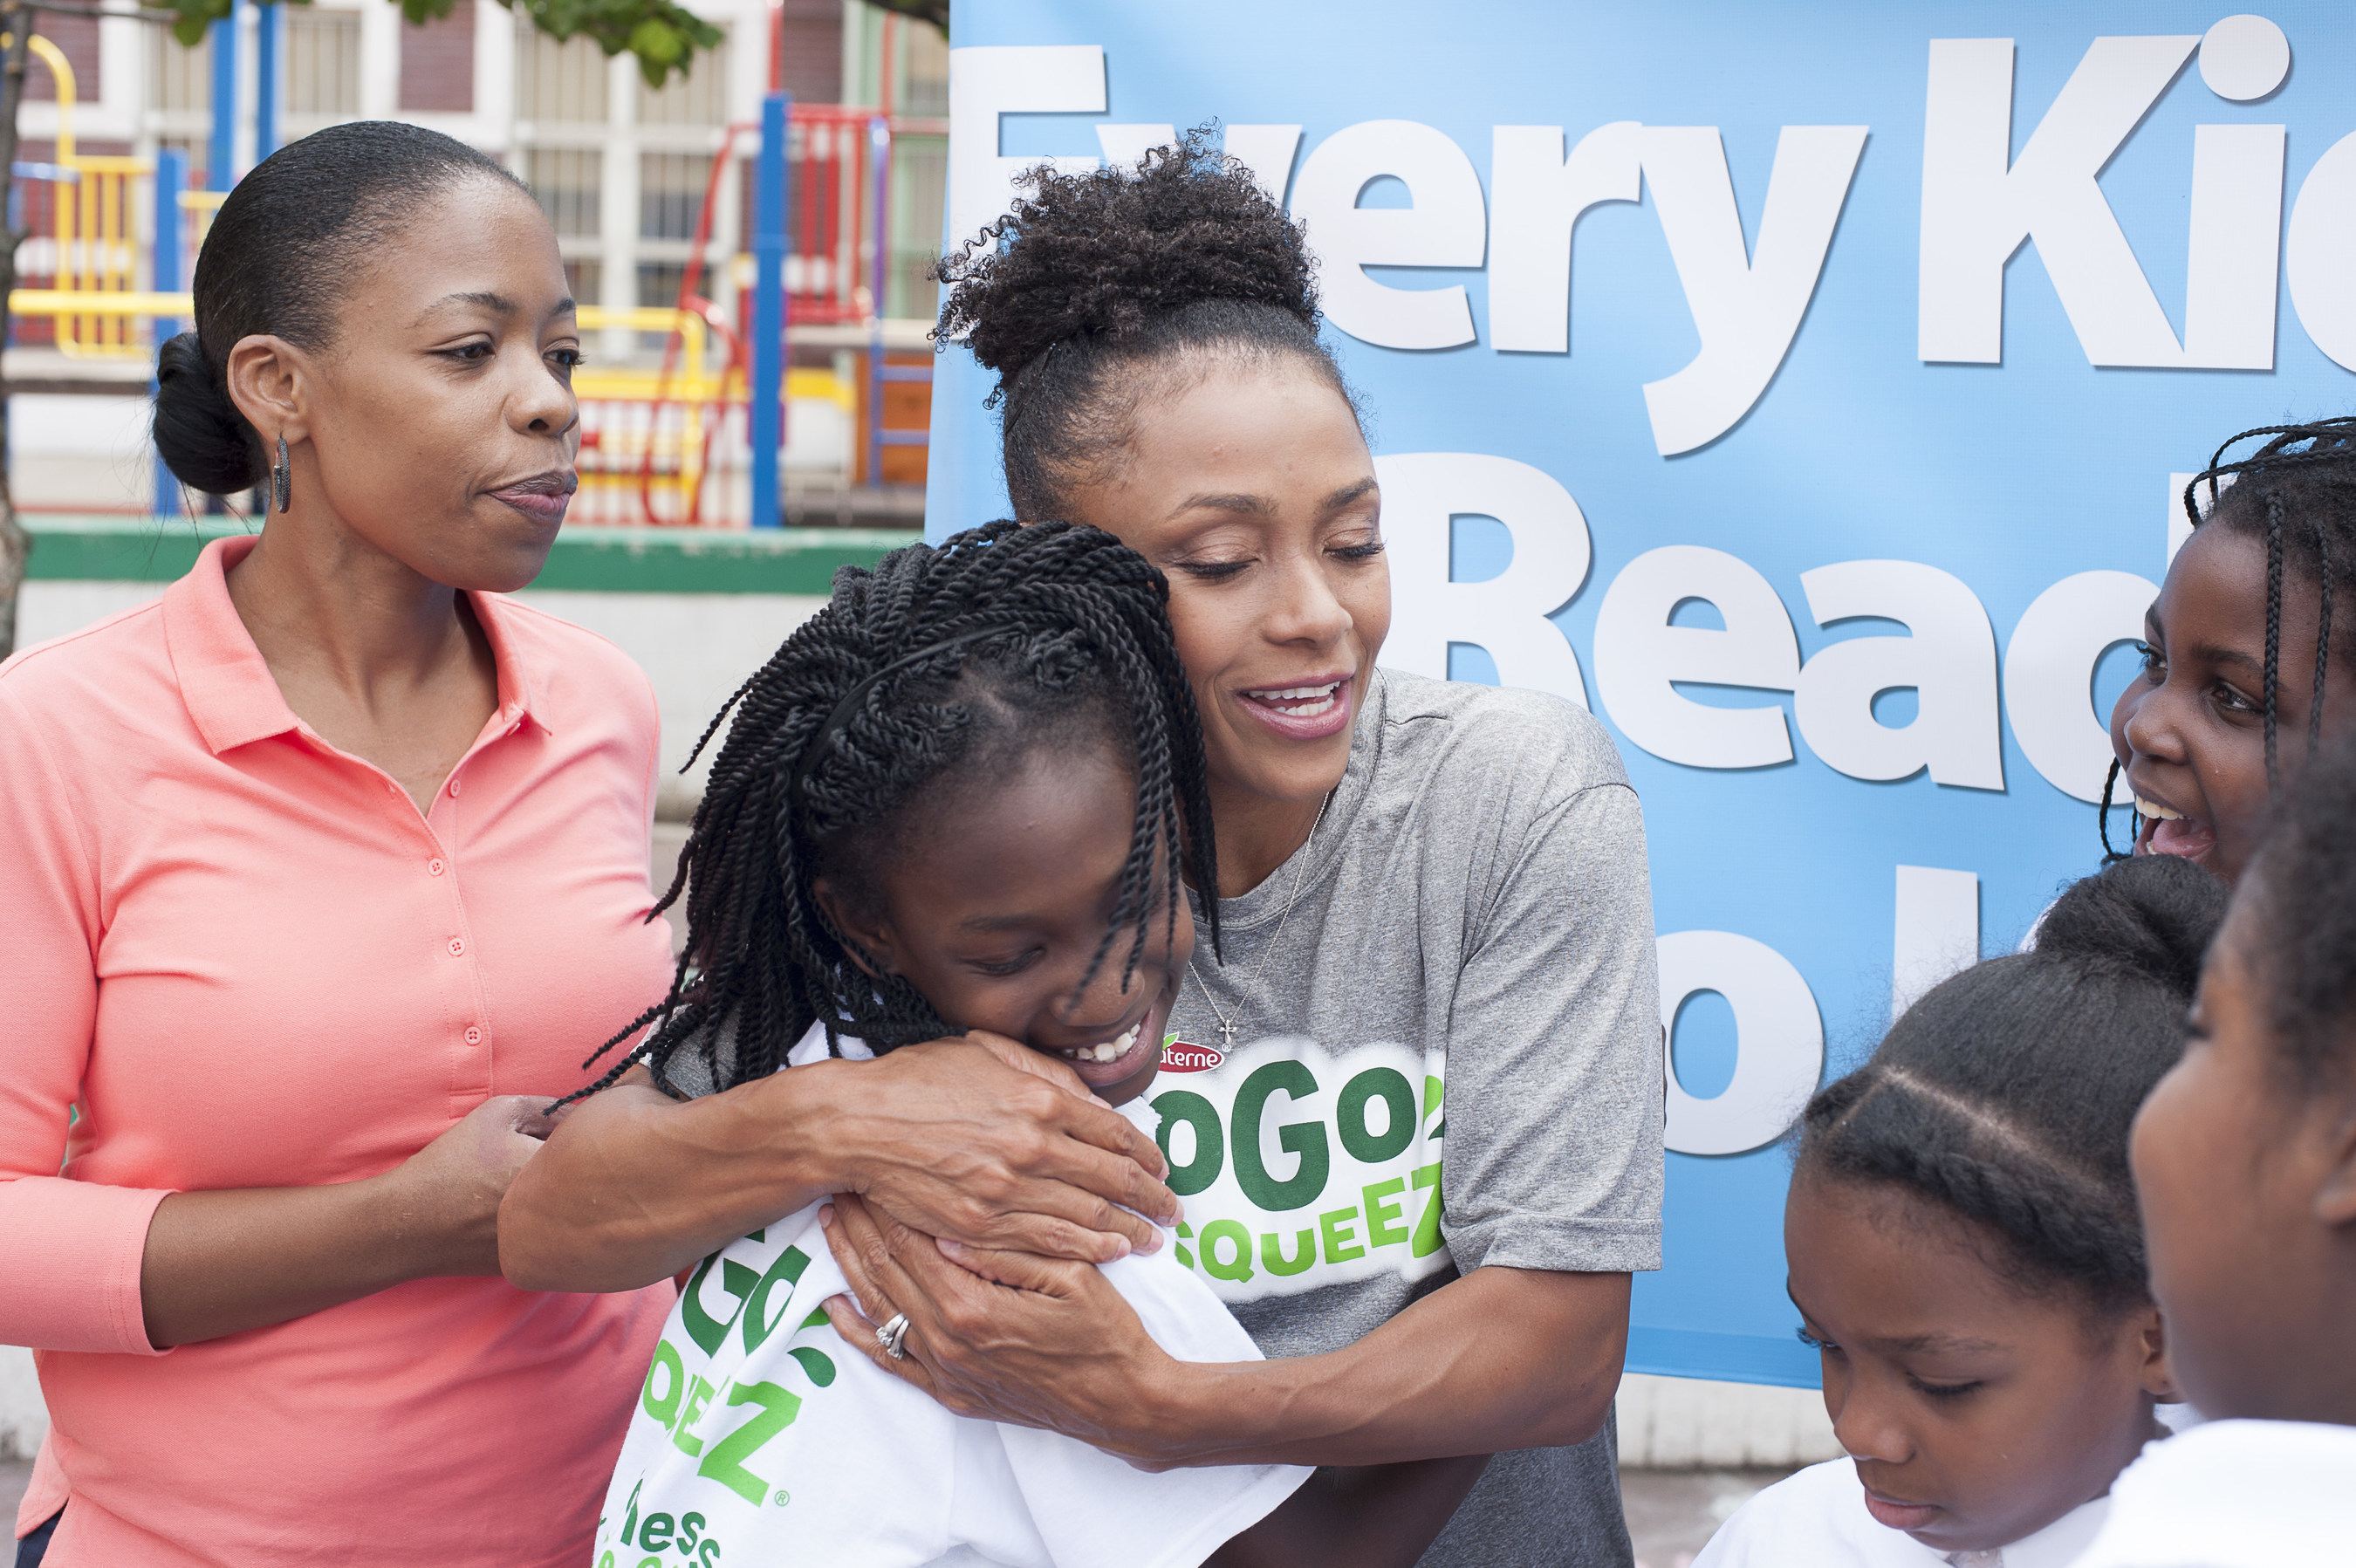 Dominique Dawes, Olympic Gold Medalist and GoGo squeeZ Goodness Ambassador, gives students at P.S. 6 in Brooklyn, NY a squeeZ after leading a workout and announcing a grant to improve access to healthy foods and fitness on behalf of GoGo squeeZ and Action for Healthy Kids on September 21, 2016. (Photo by Phillip Reed).